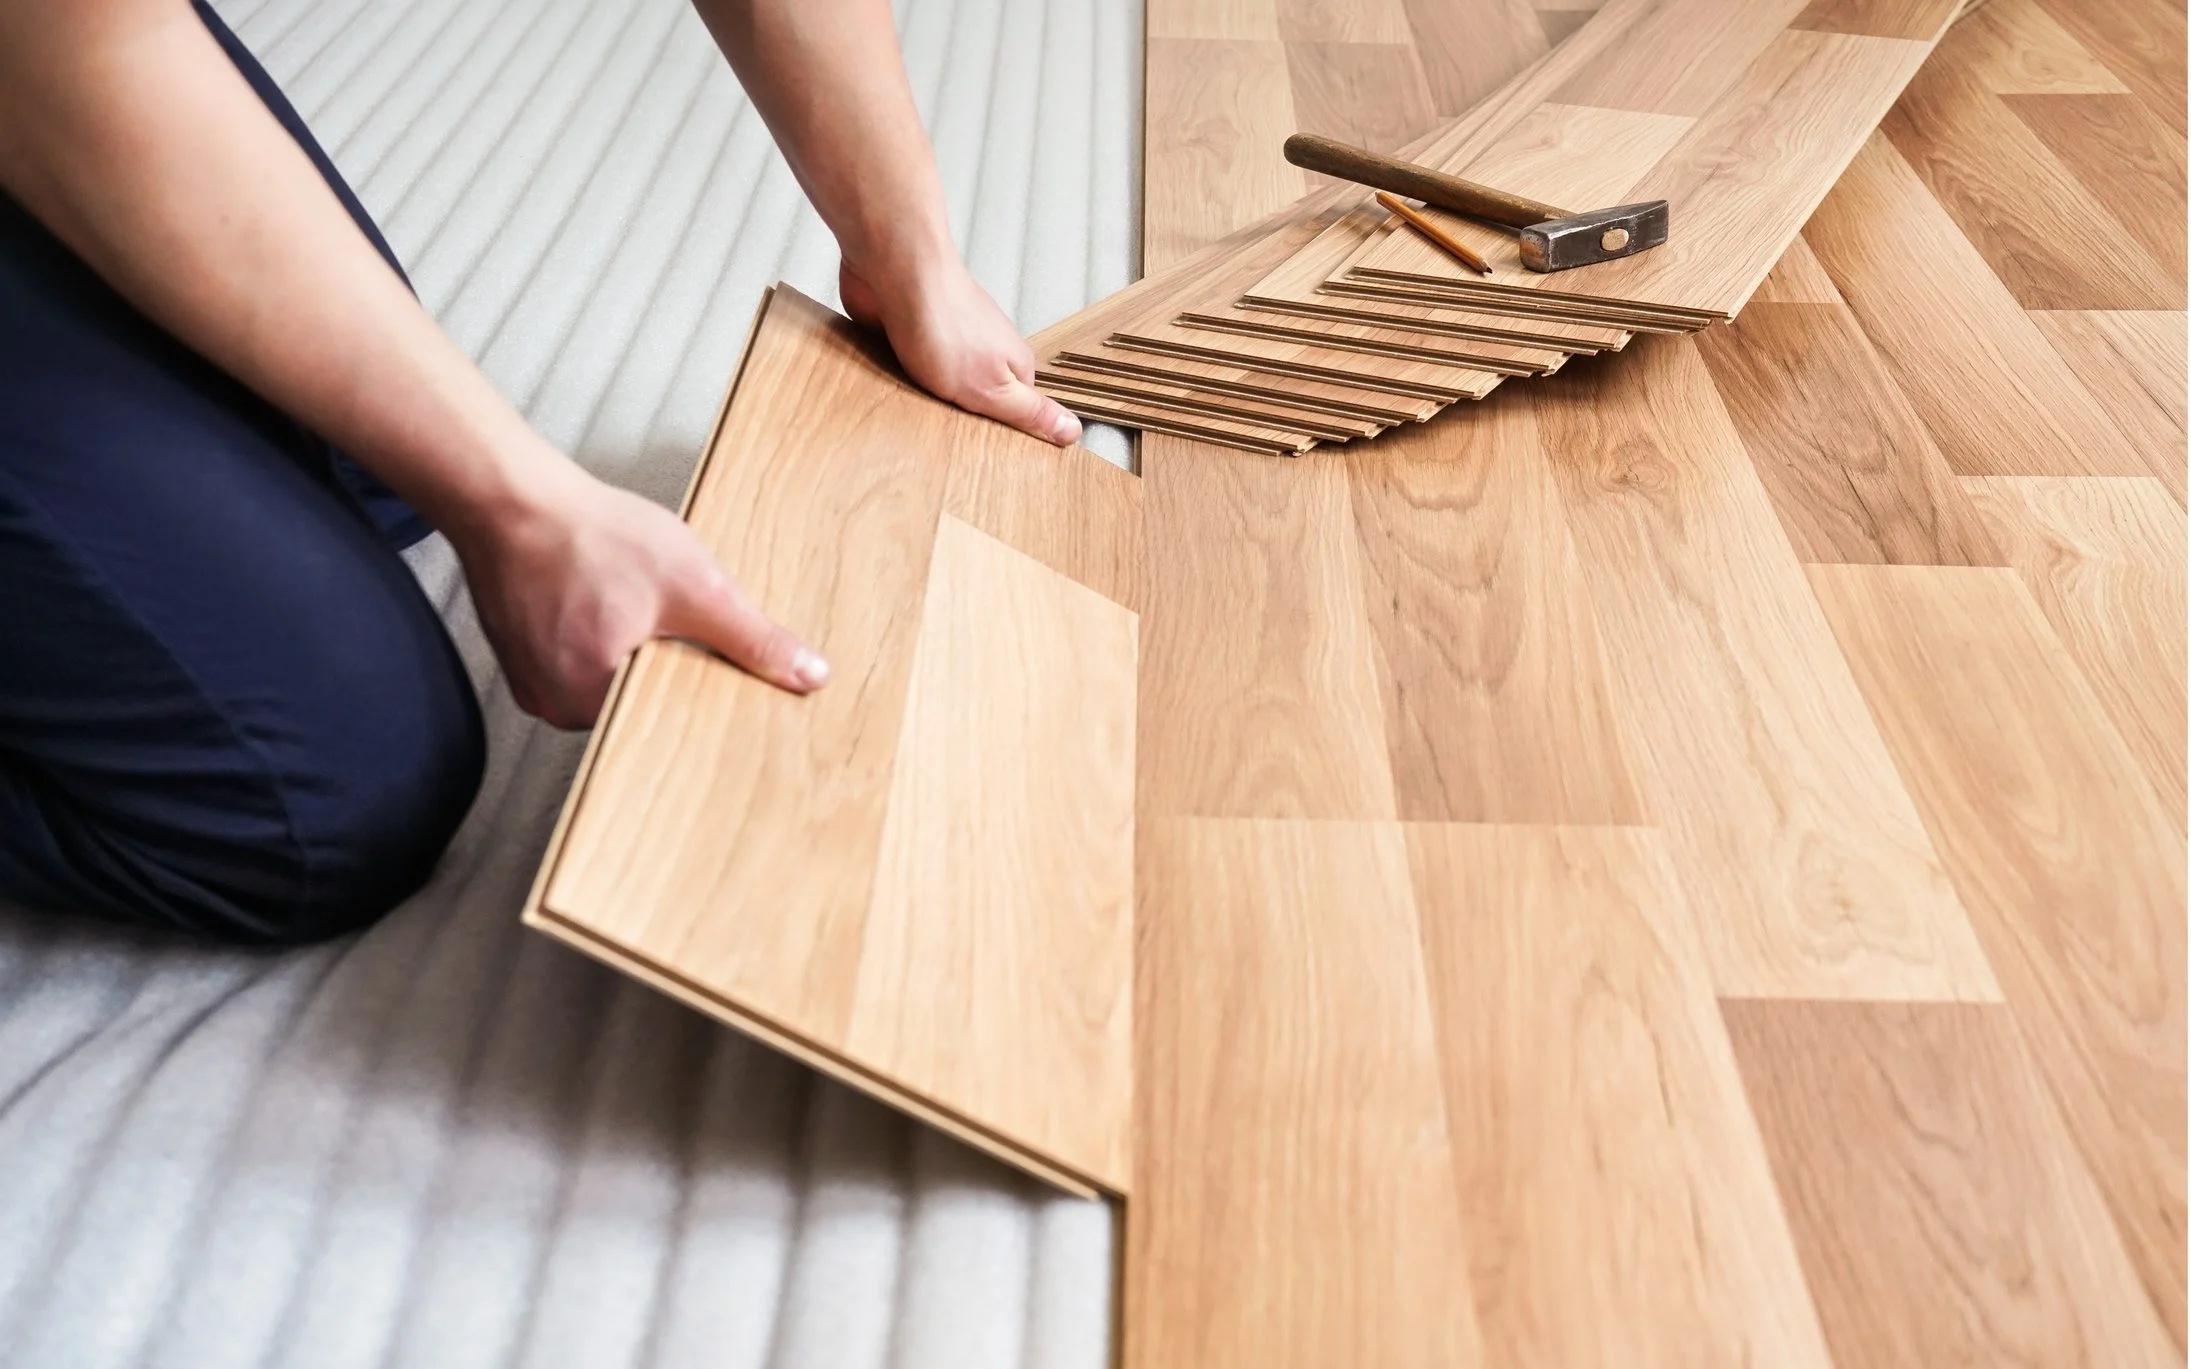 What Should You Not Use on Vinyl Plank Flooring